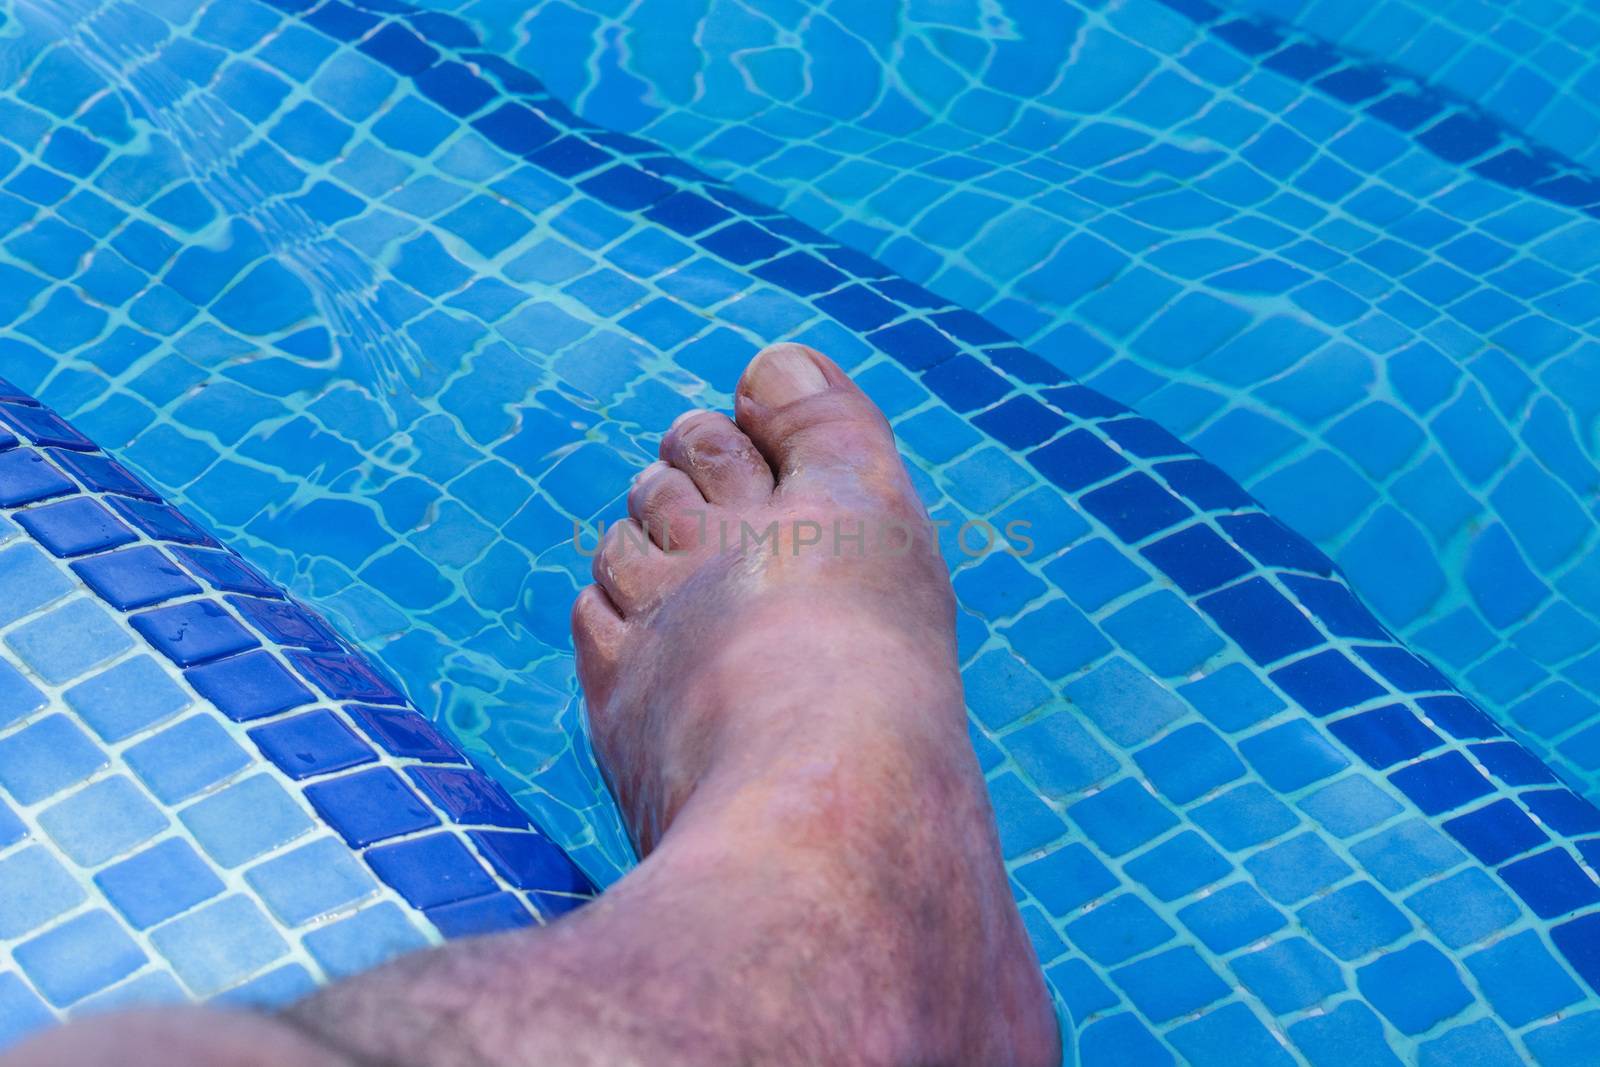 Men feet in a beautiful swimming pool with blue tiles.